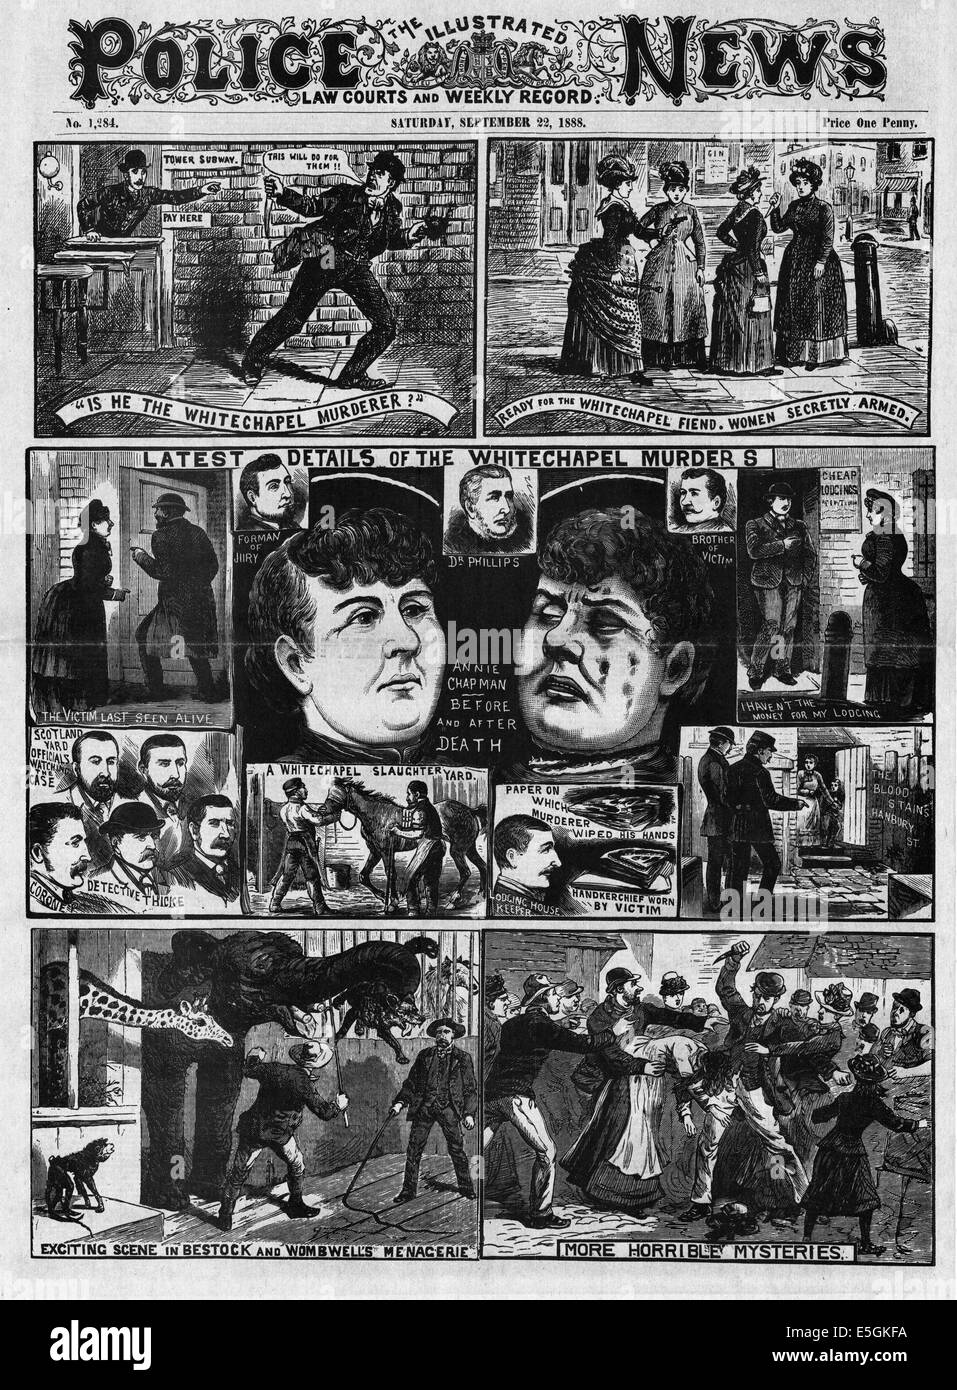 1888 Illustrated Police News front page reporting the murders by Jack the Ripper in the East End of London Stock Photo